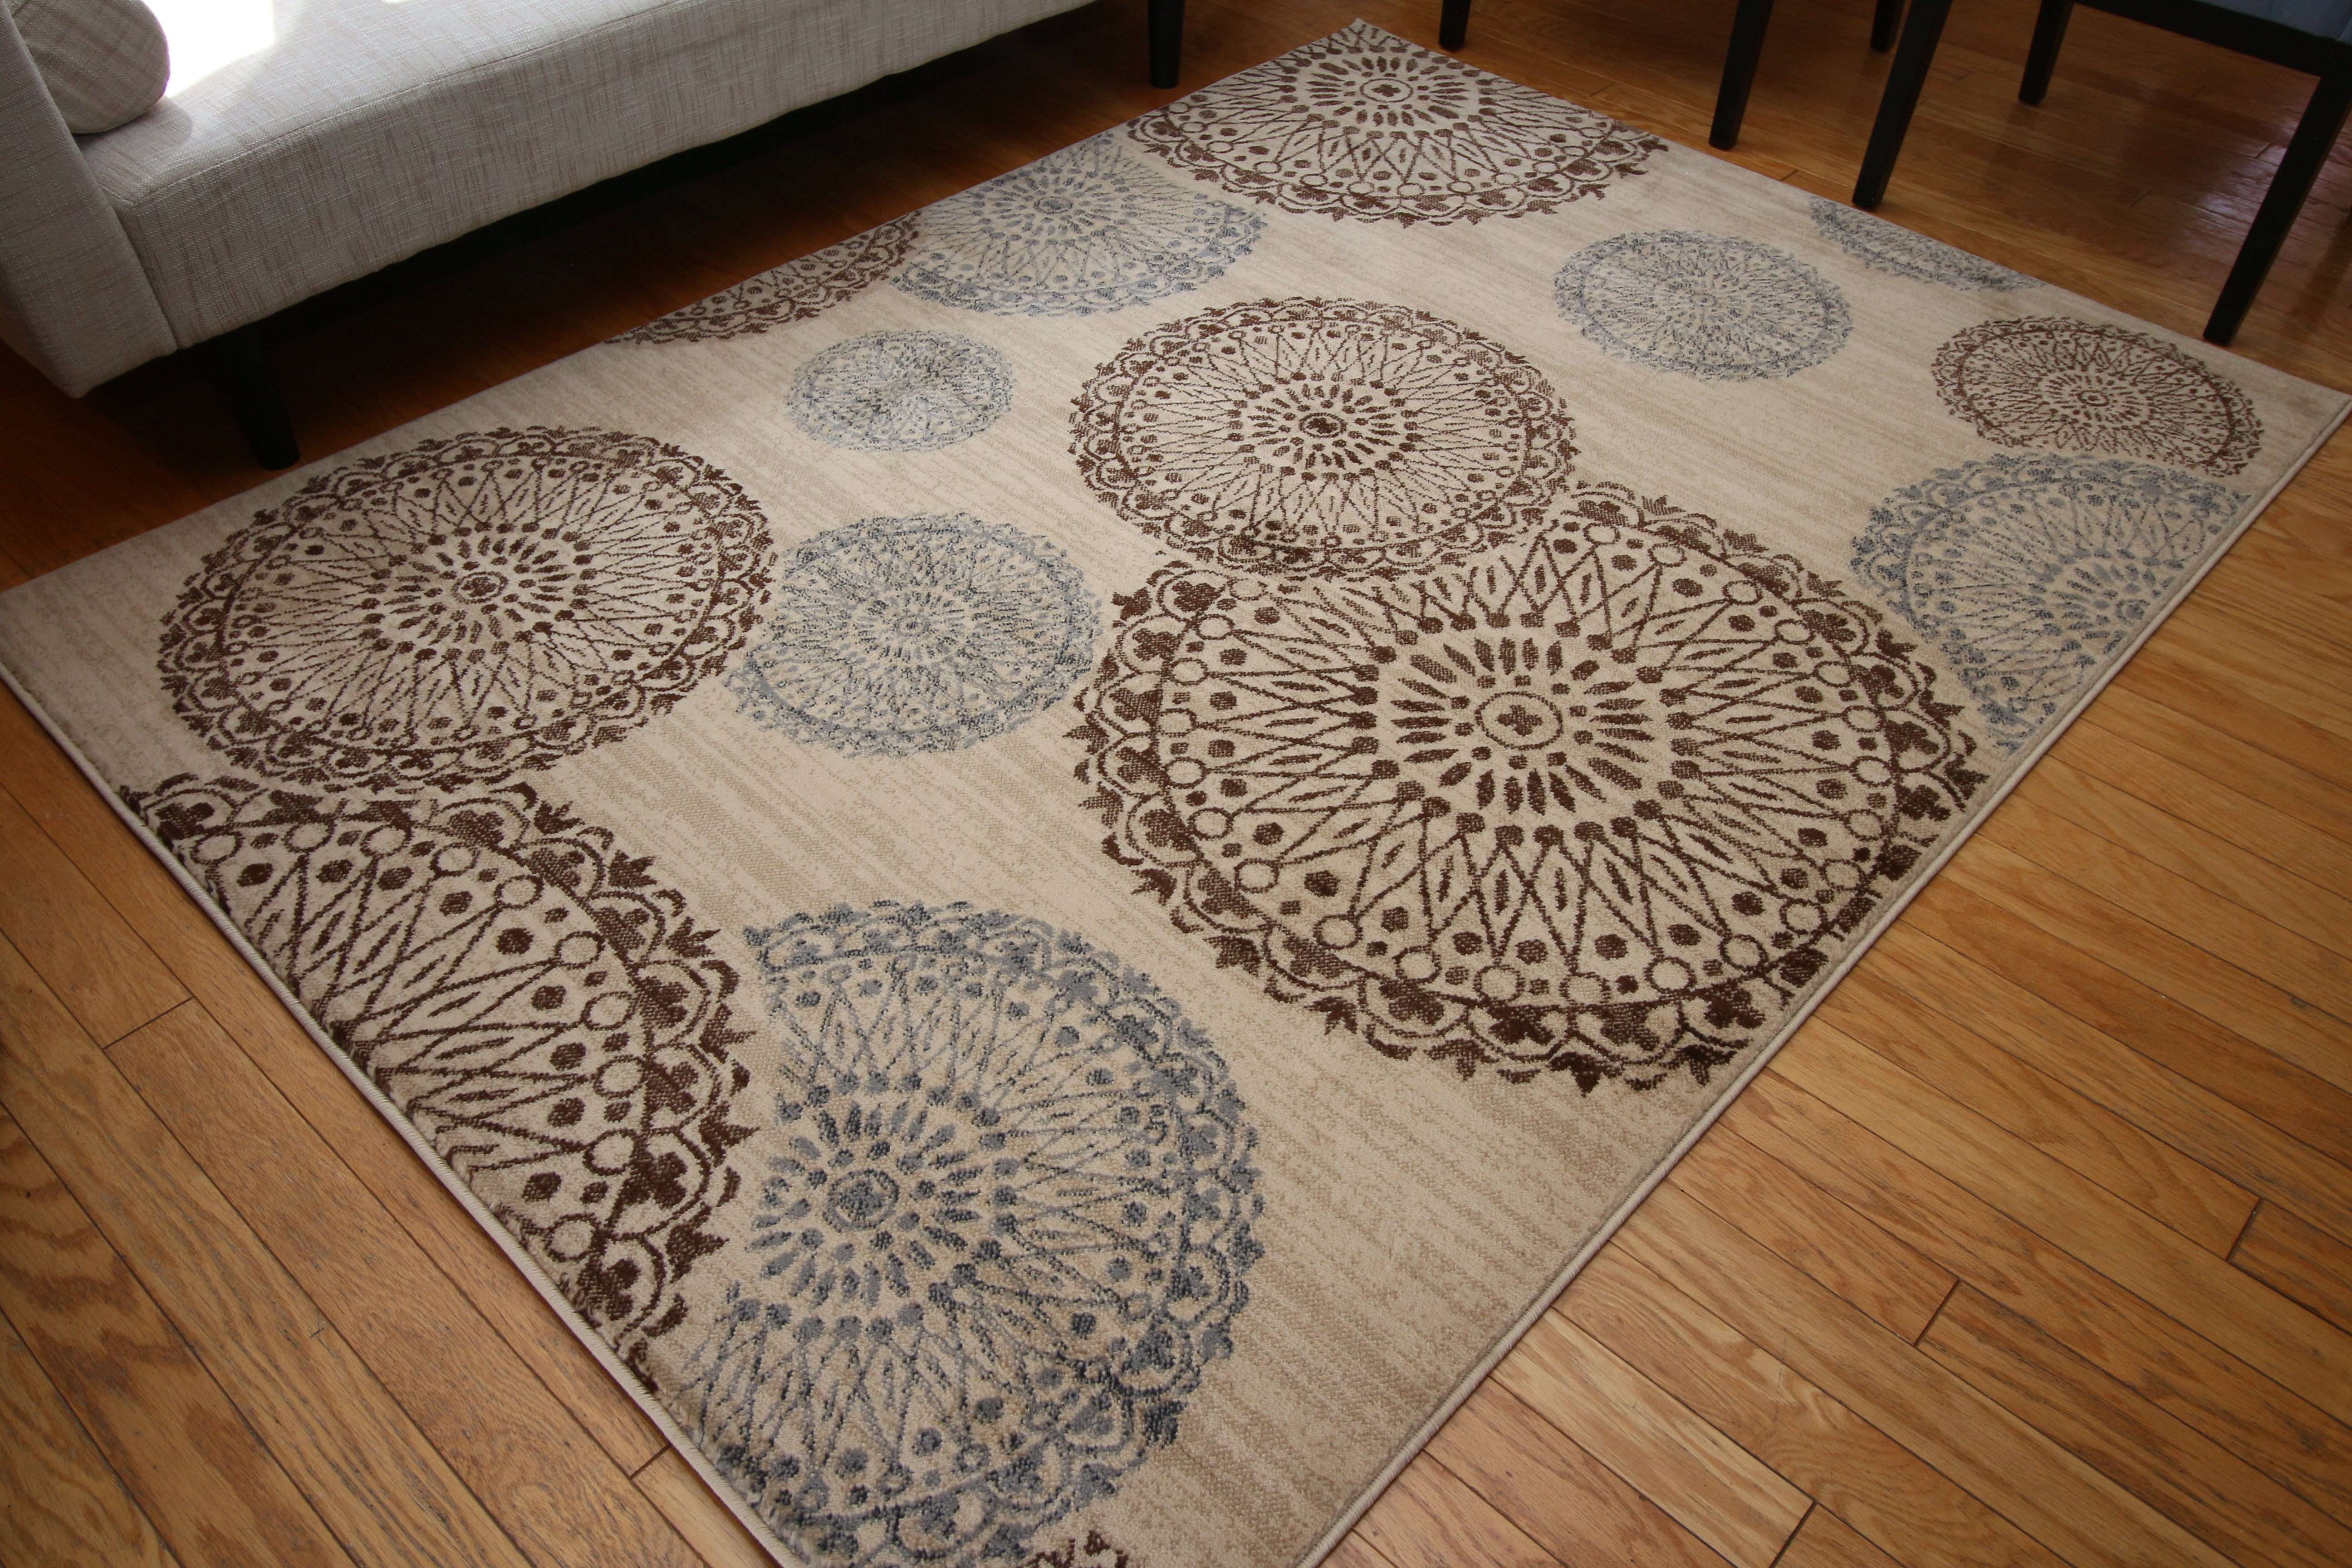  Latest Rugs for Simple Design